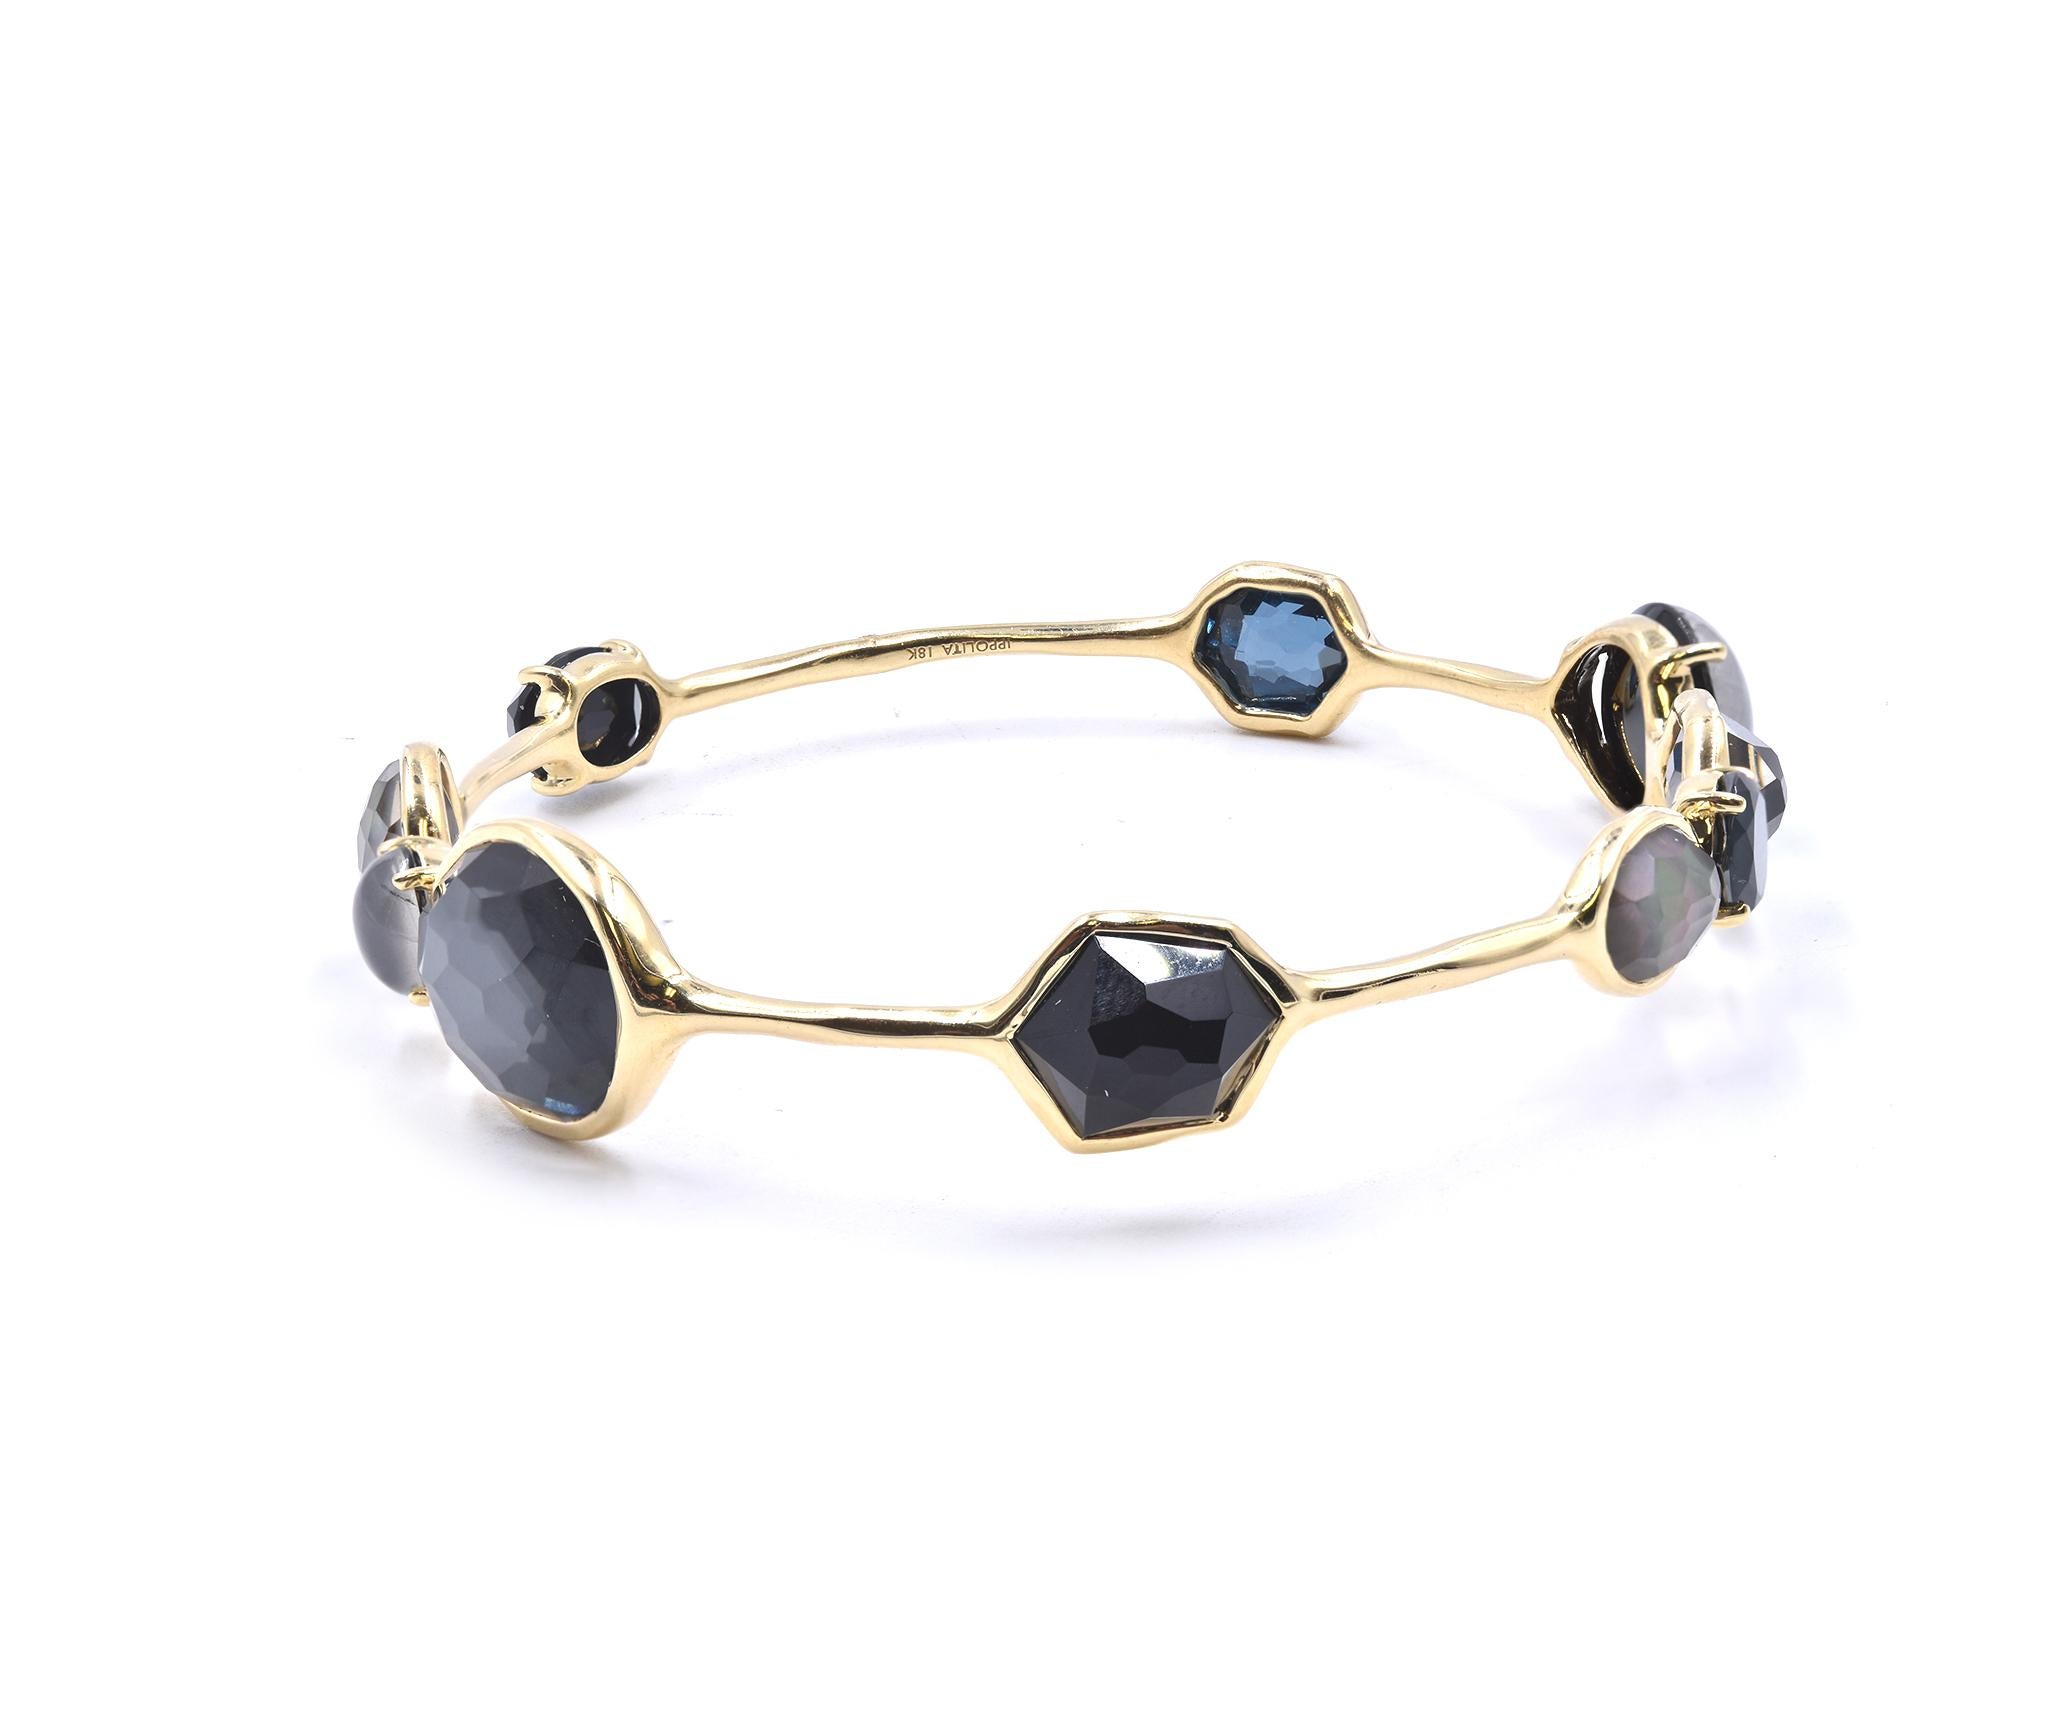 Designer: Ippolita
Material: 18K yellow gold
Weight: 21.75 grams
Measurements: bracelet will fit up to a 7.5-inch wrist 

